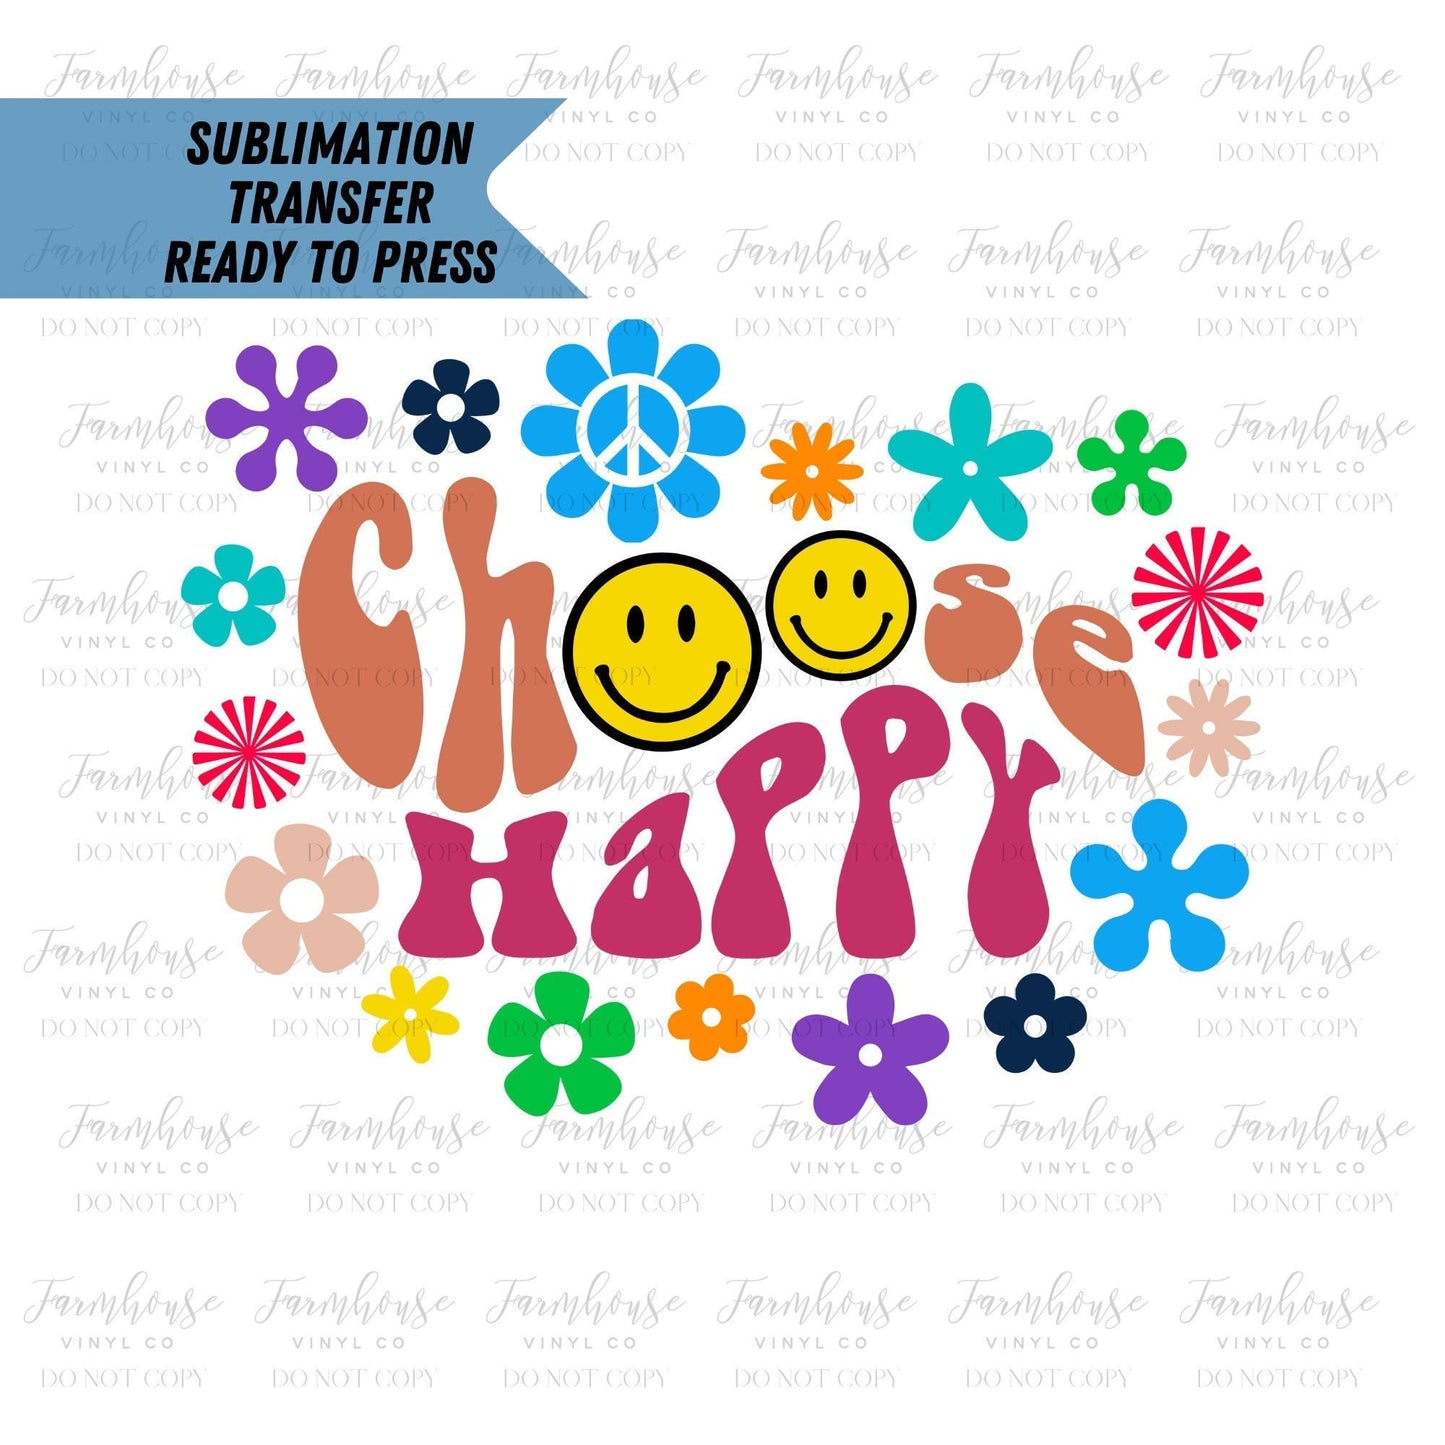 Choose Happy Flower Power Retro Wavy Ready To Press, Sublimation Transfers, Hippie Colorful Smile Face, Sublimation, Transfer Ready To Press - Farmhouse Vinyl Co